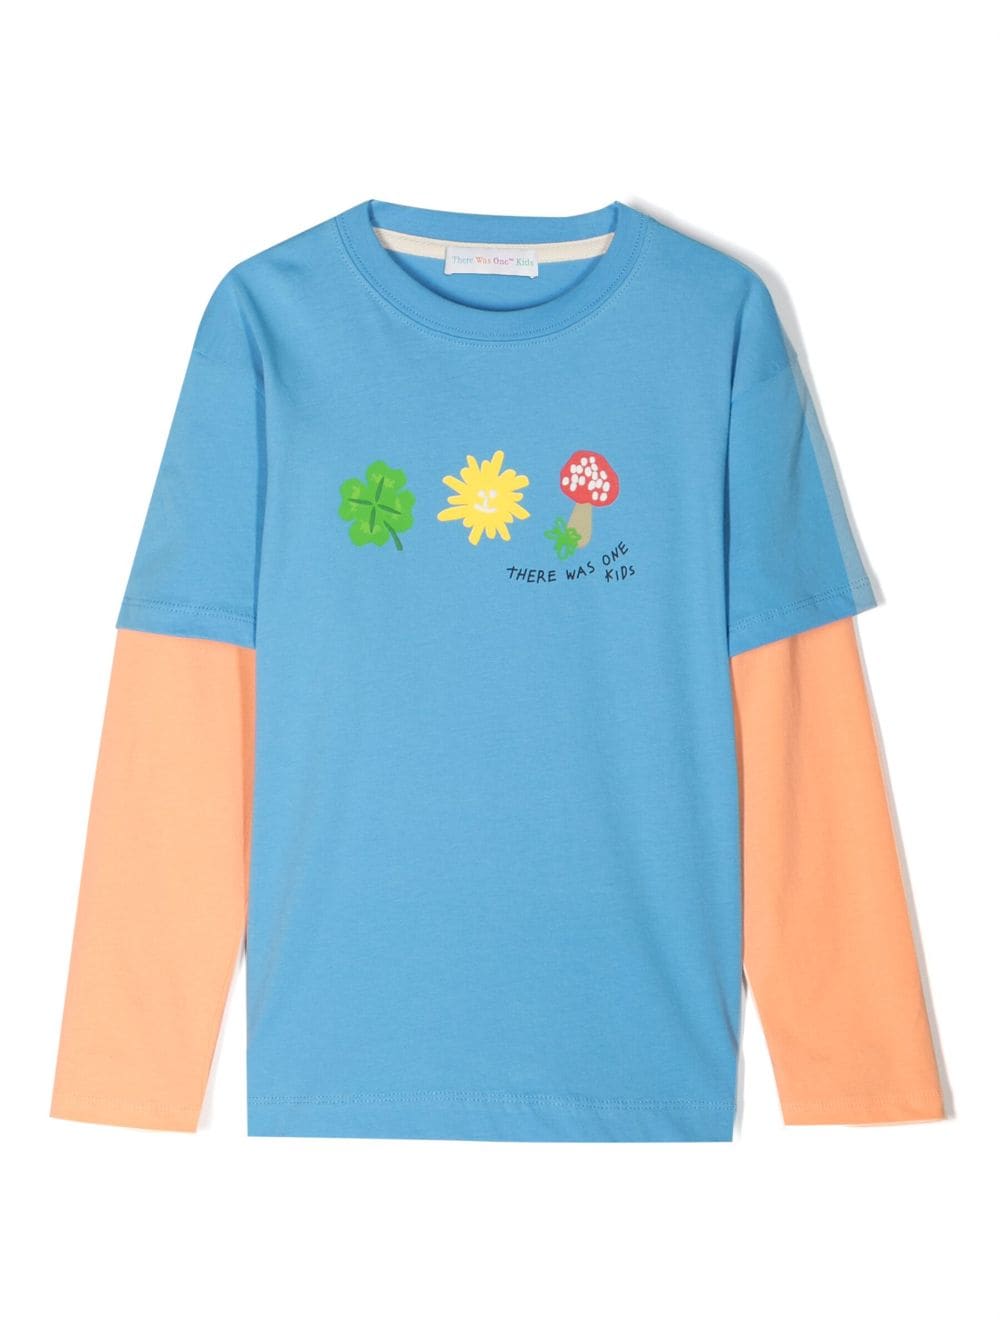 There Was One Kids Langarmshirt in Colour-Block-Optik - Blau von There Was One Kids